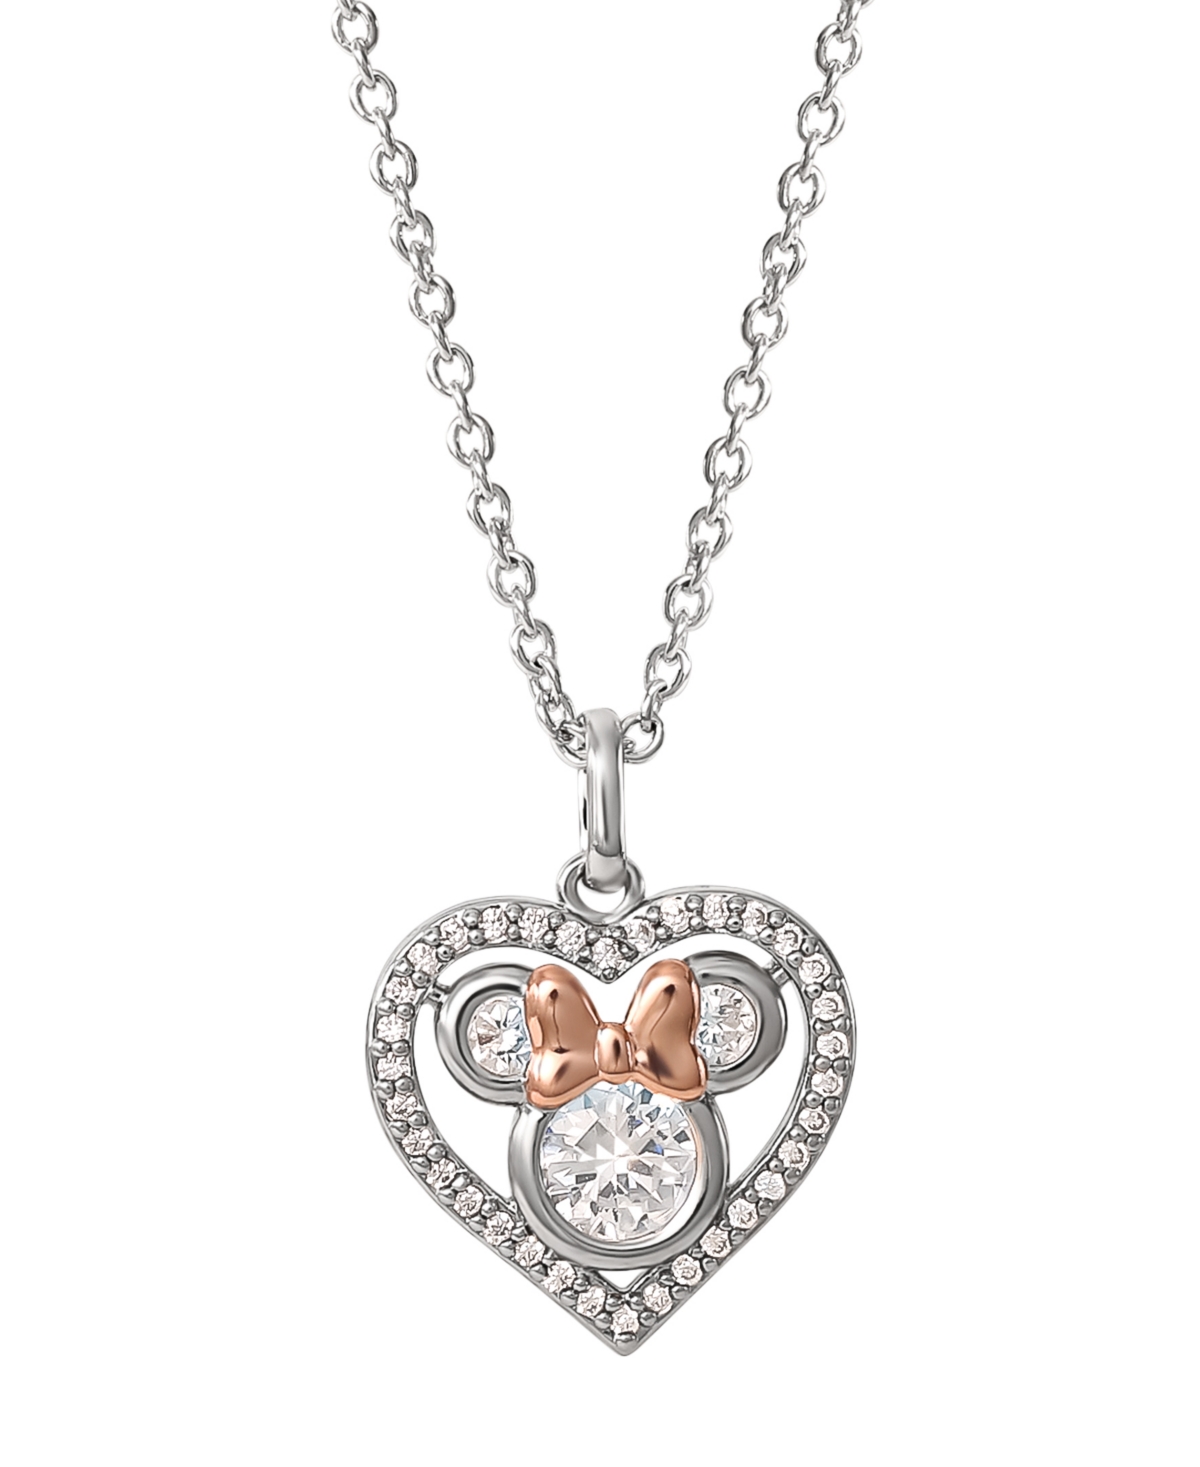 Cubic Zirconia Minnie Mouse Pendant Necklace in Sterling Silver & 18K Rose Gold-Plate, 16" + 2" extender - Silver